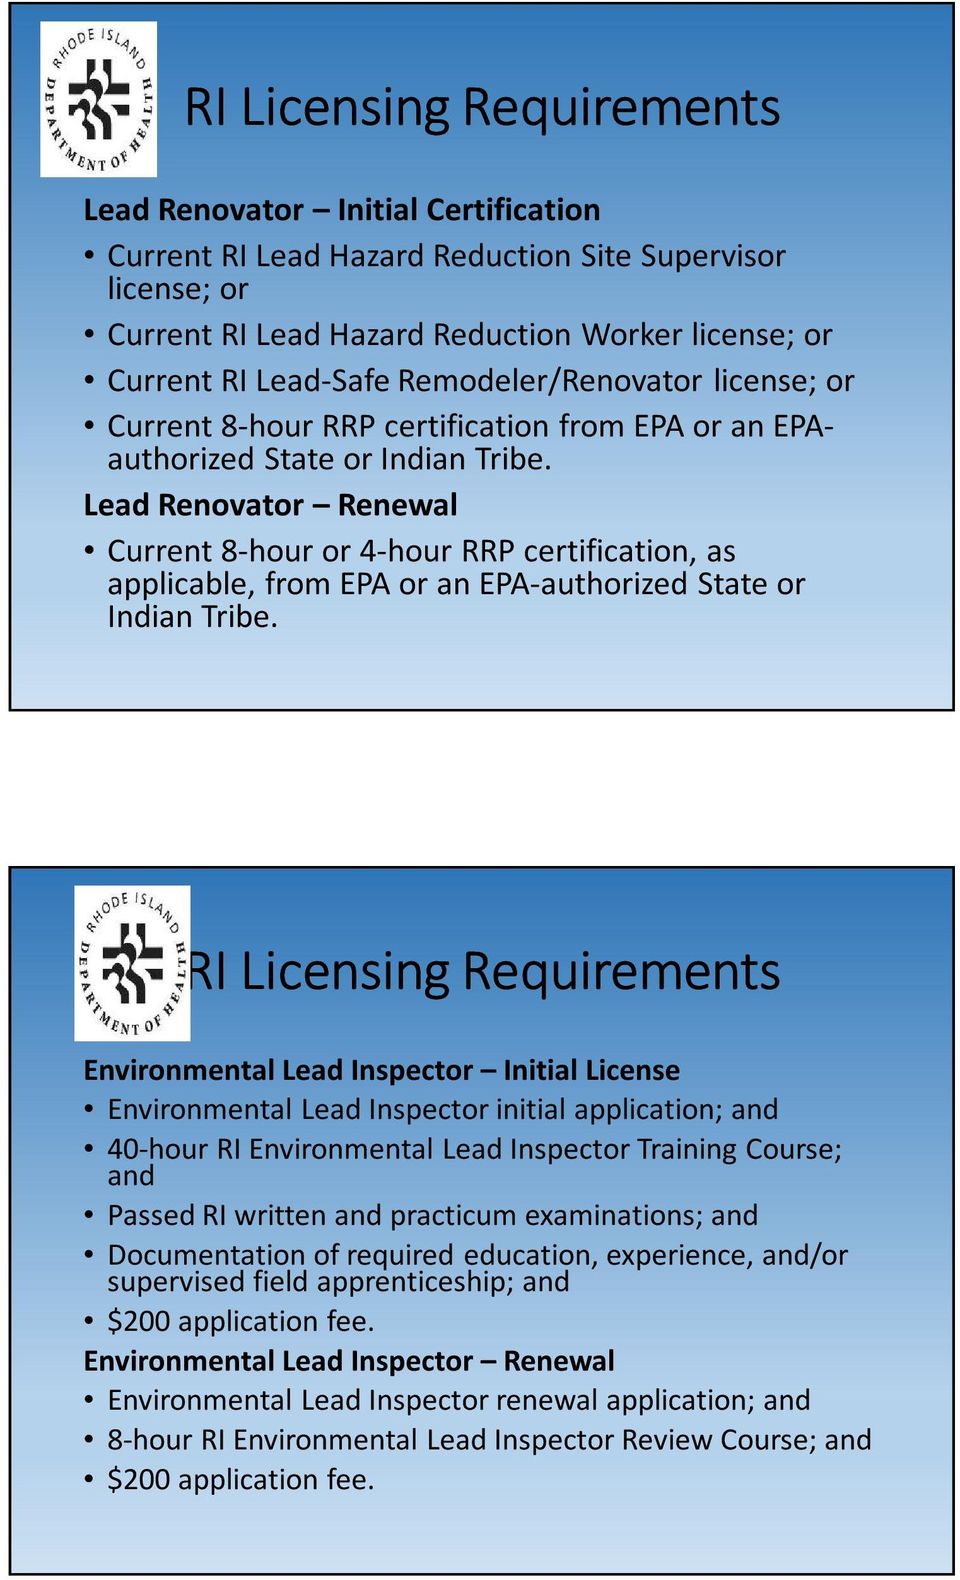 Lead Renovator Renewal Current 8-hour or 4-hour RRP certification, as applicable, from EPA or an EPA-authorized State or Indian Tribe.